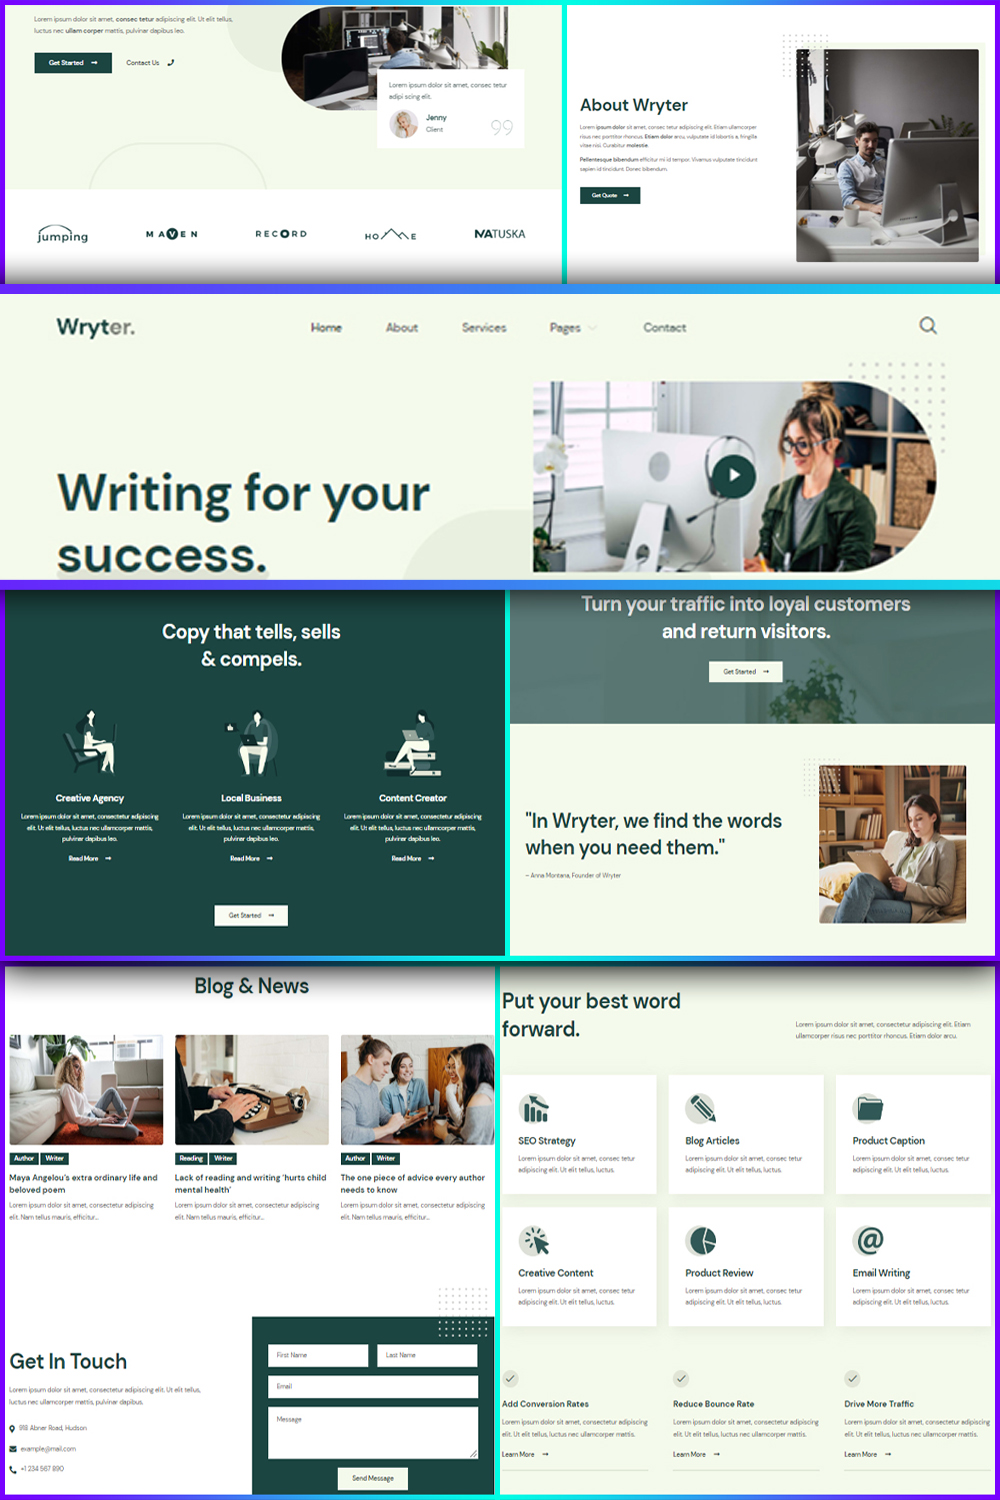 Illustrations wryter content copywriting services elementor template kit of pinterest.